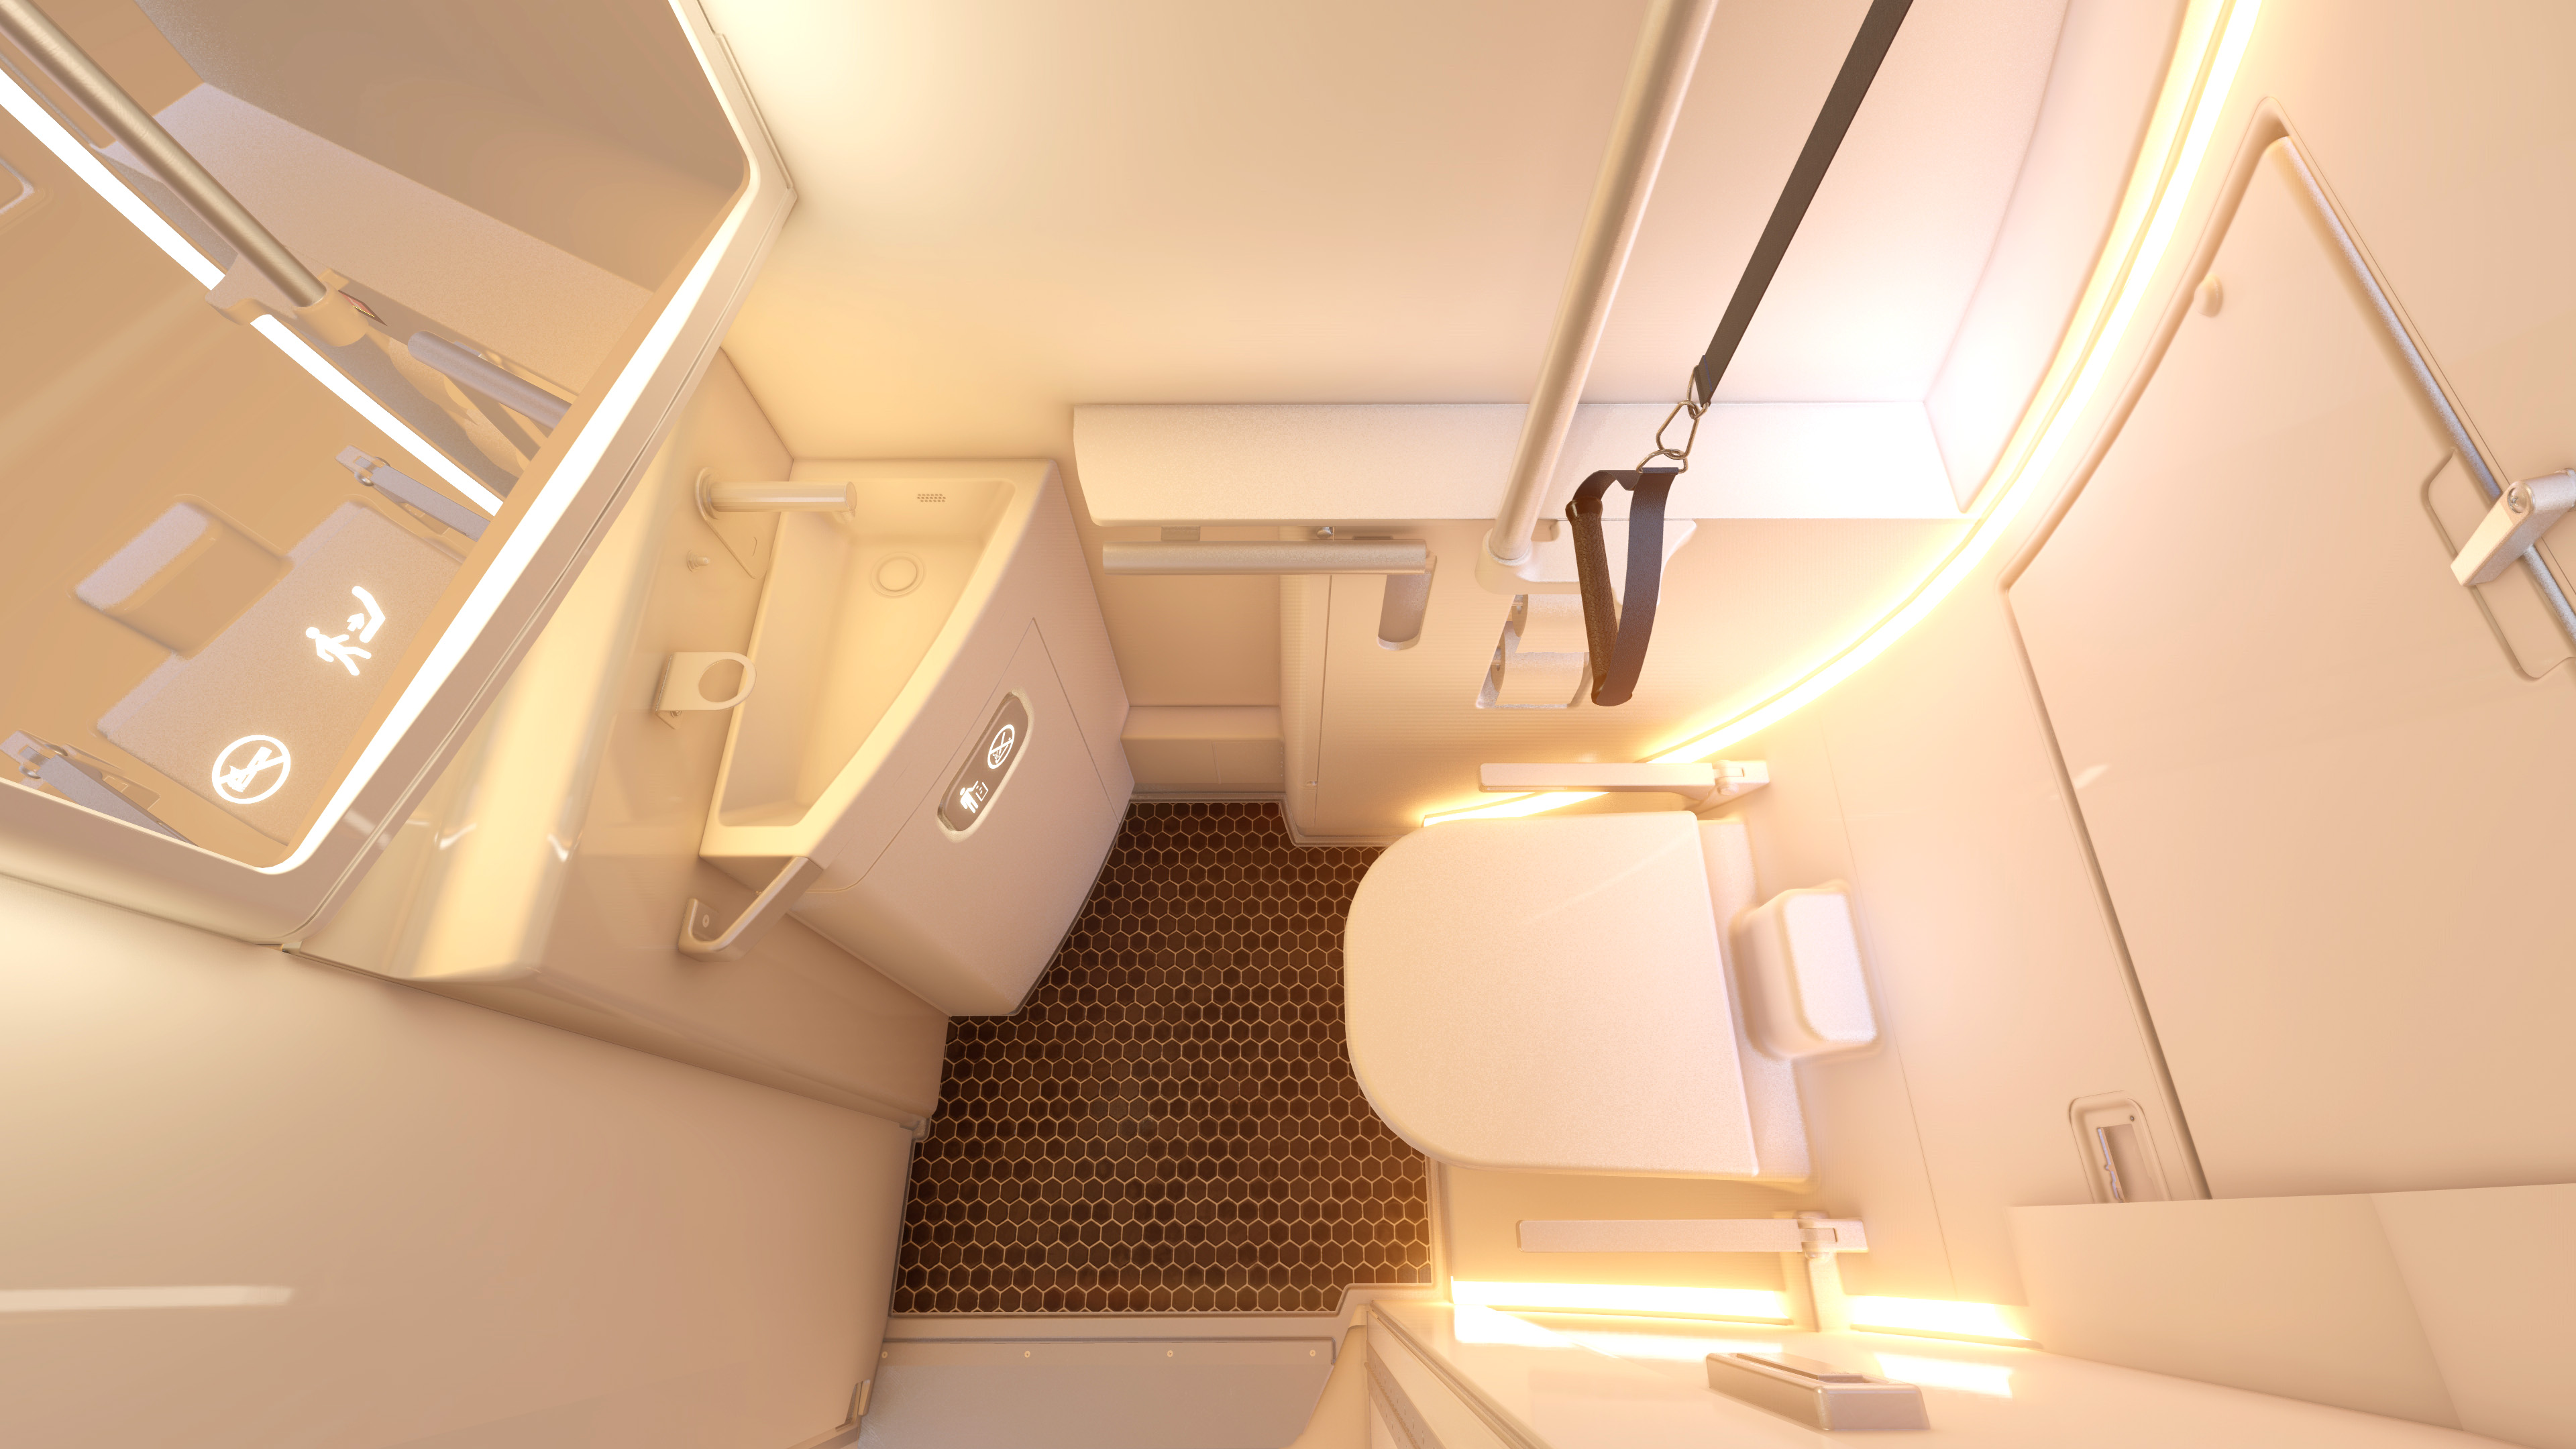 ST Engineering Receives EASA STC for Expandable Cabin Lavatory Solution